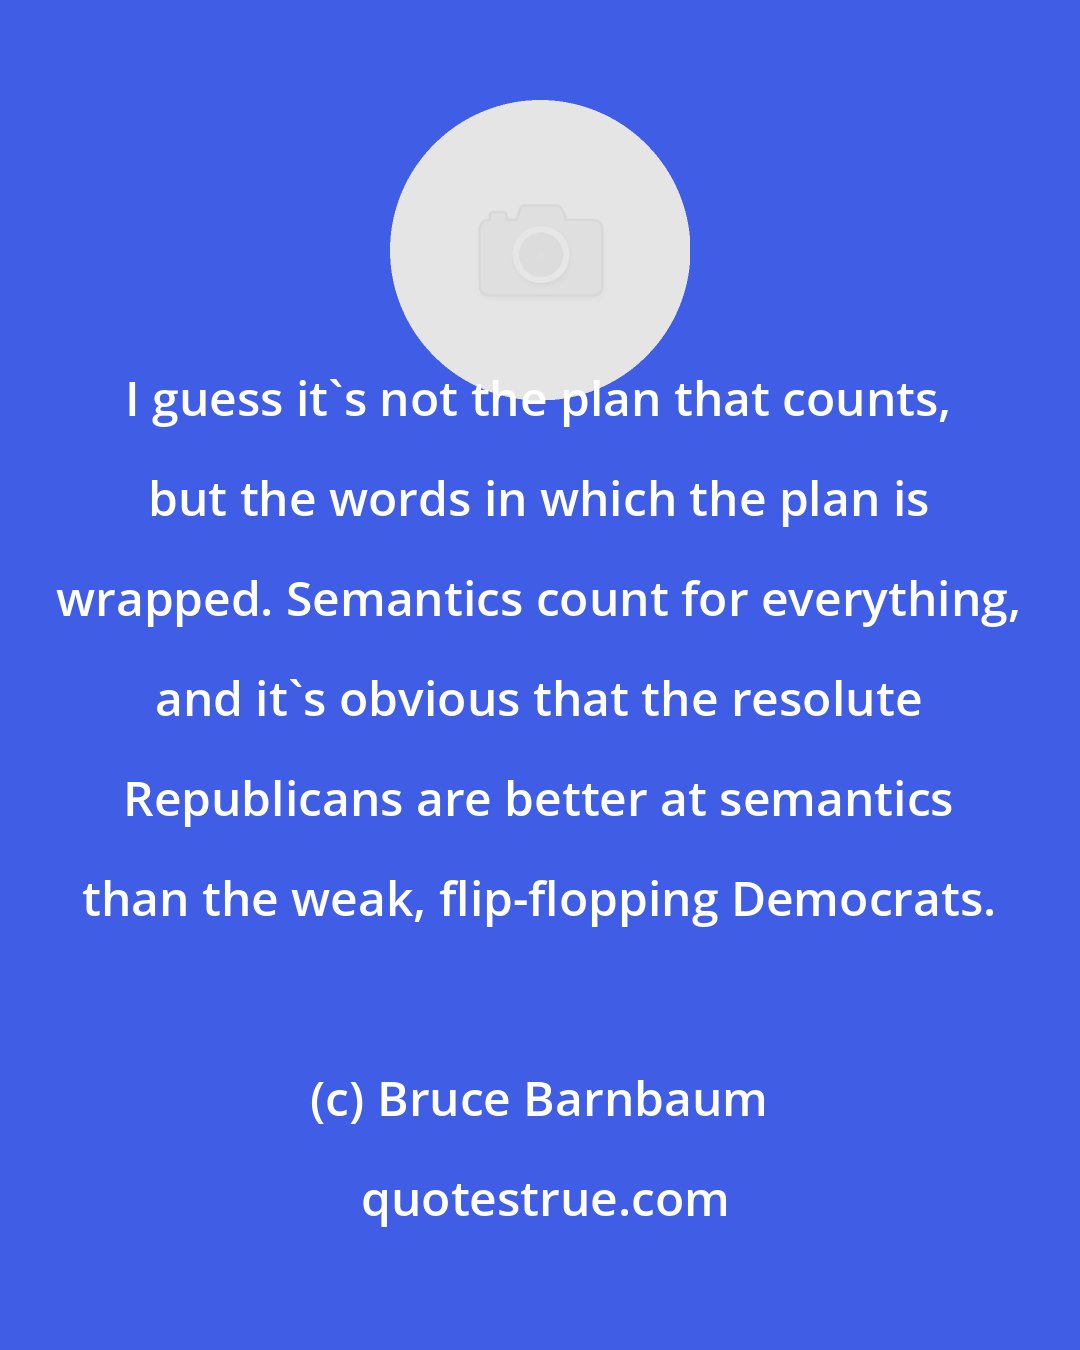 Bruce Barnbaum: I guess it's not the plan that counts, but the words in which the plan is wrapped. Semantics count for everything, and it's obvious that the resolute Republicans are better at semantics than the weak, flip-flopping Democrats.